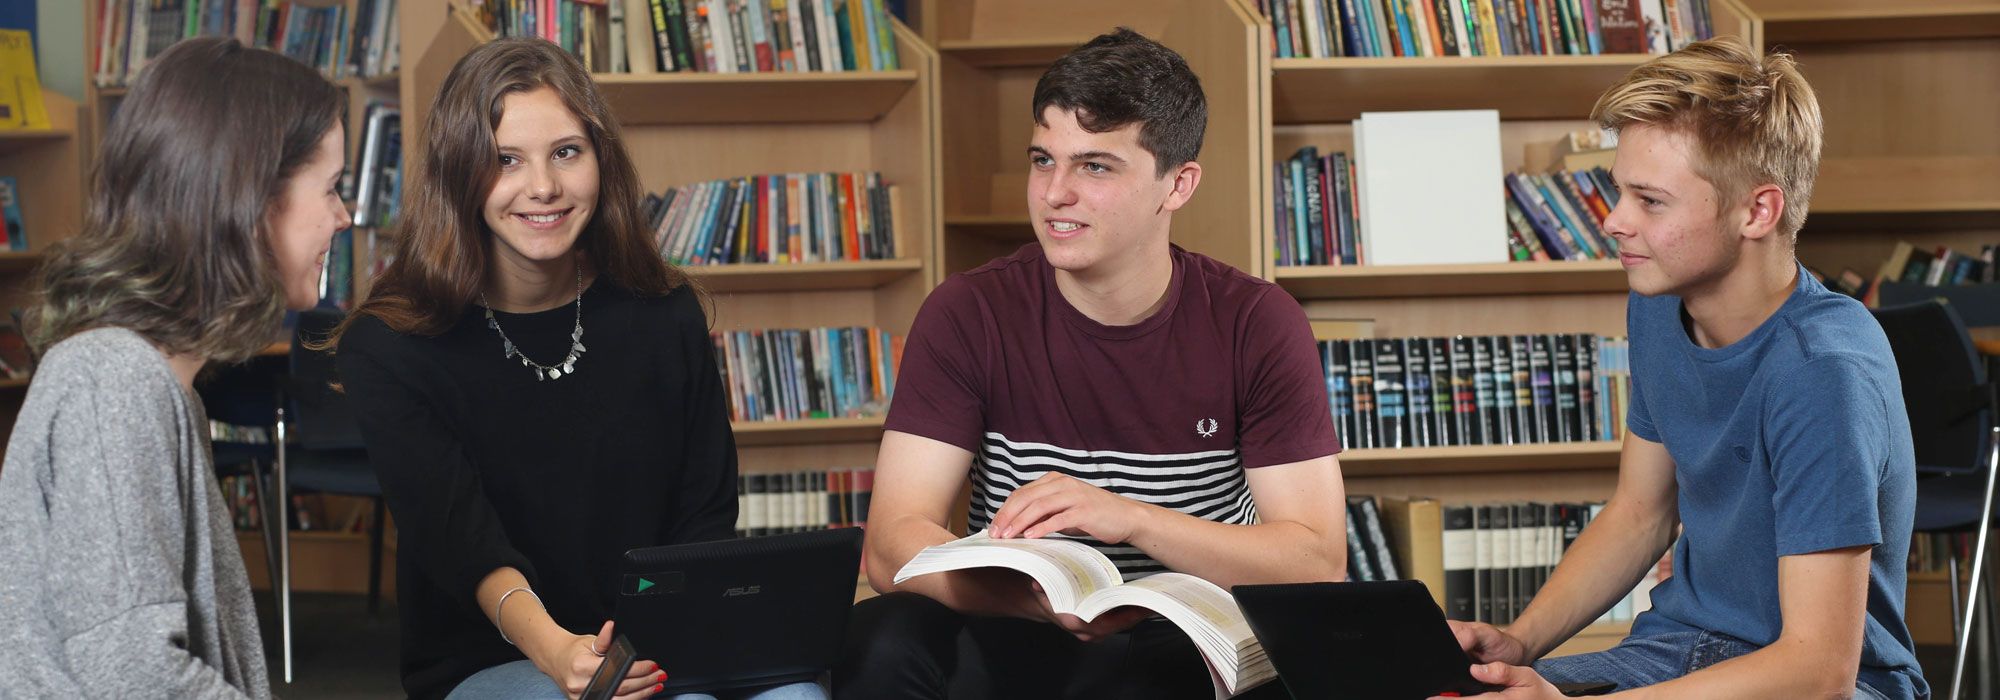 Sixth Form students in Learning Resource Centre